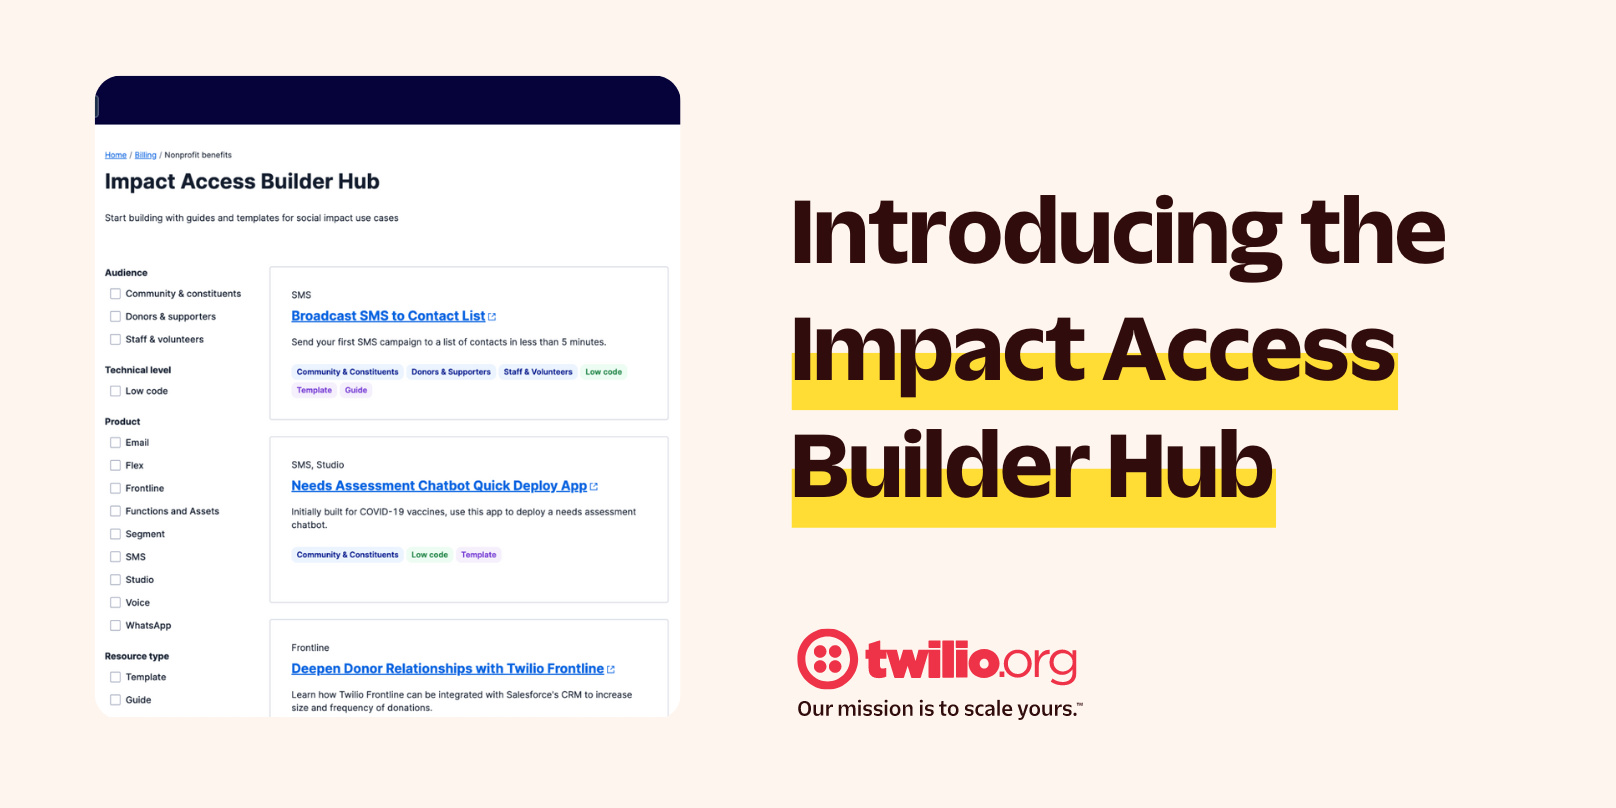 Introducing the Impact Access Builder Hub